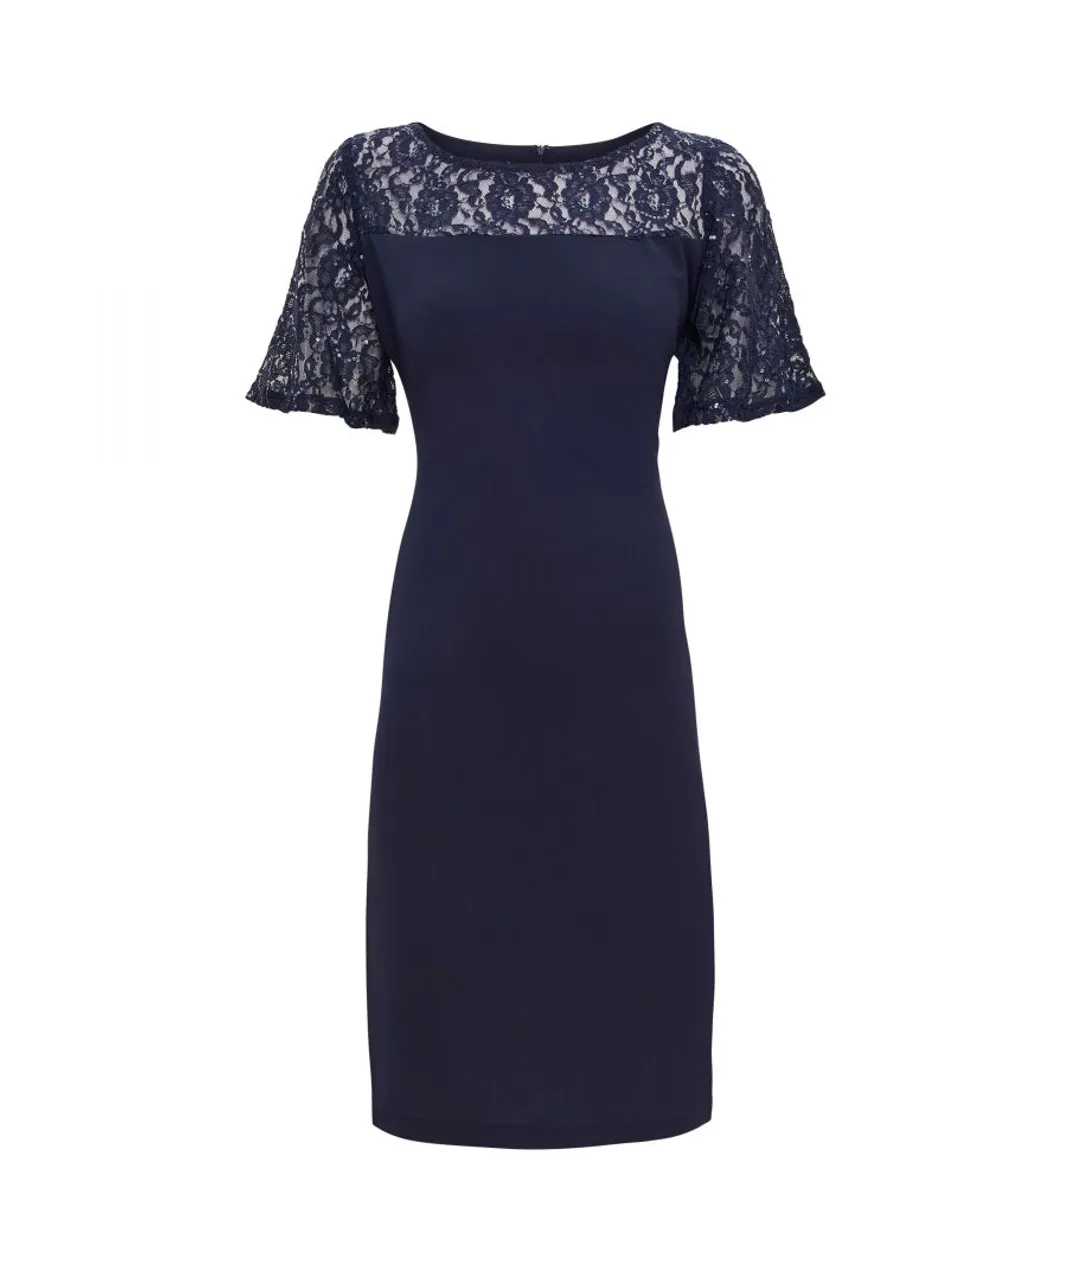 Gina Bacconi Womens Imola Lace Cocktail Dress With Embroidered Yoke - Navy